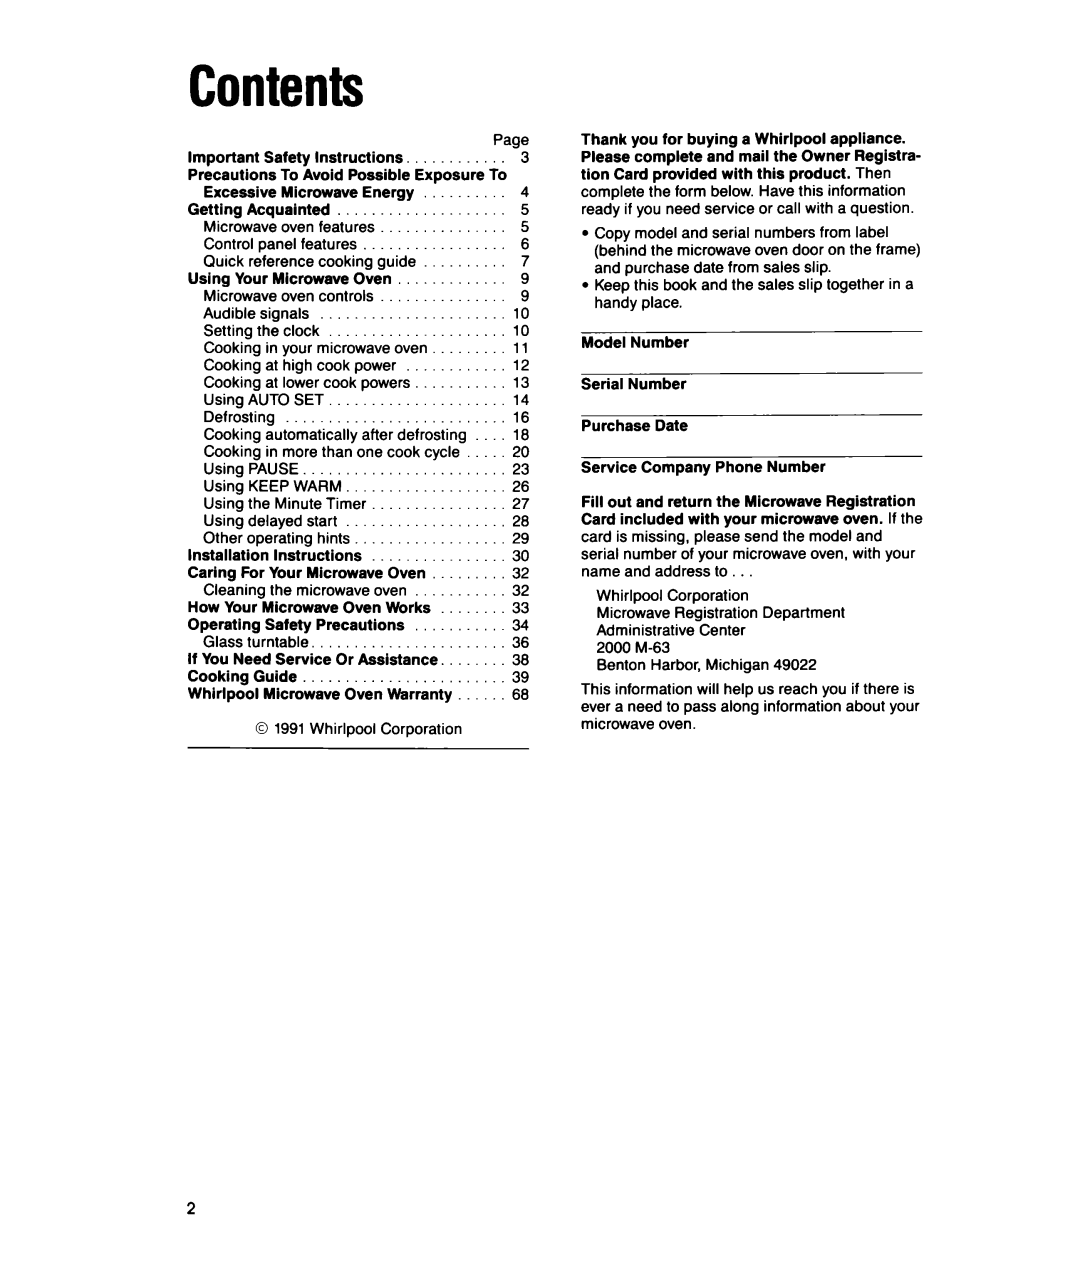 Whirlpool MTZ080XY user manual Contents 